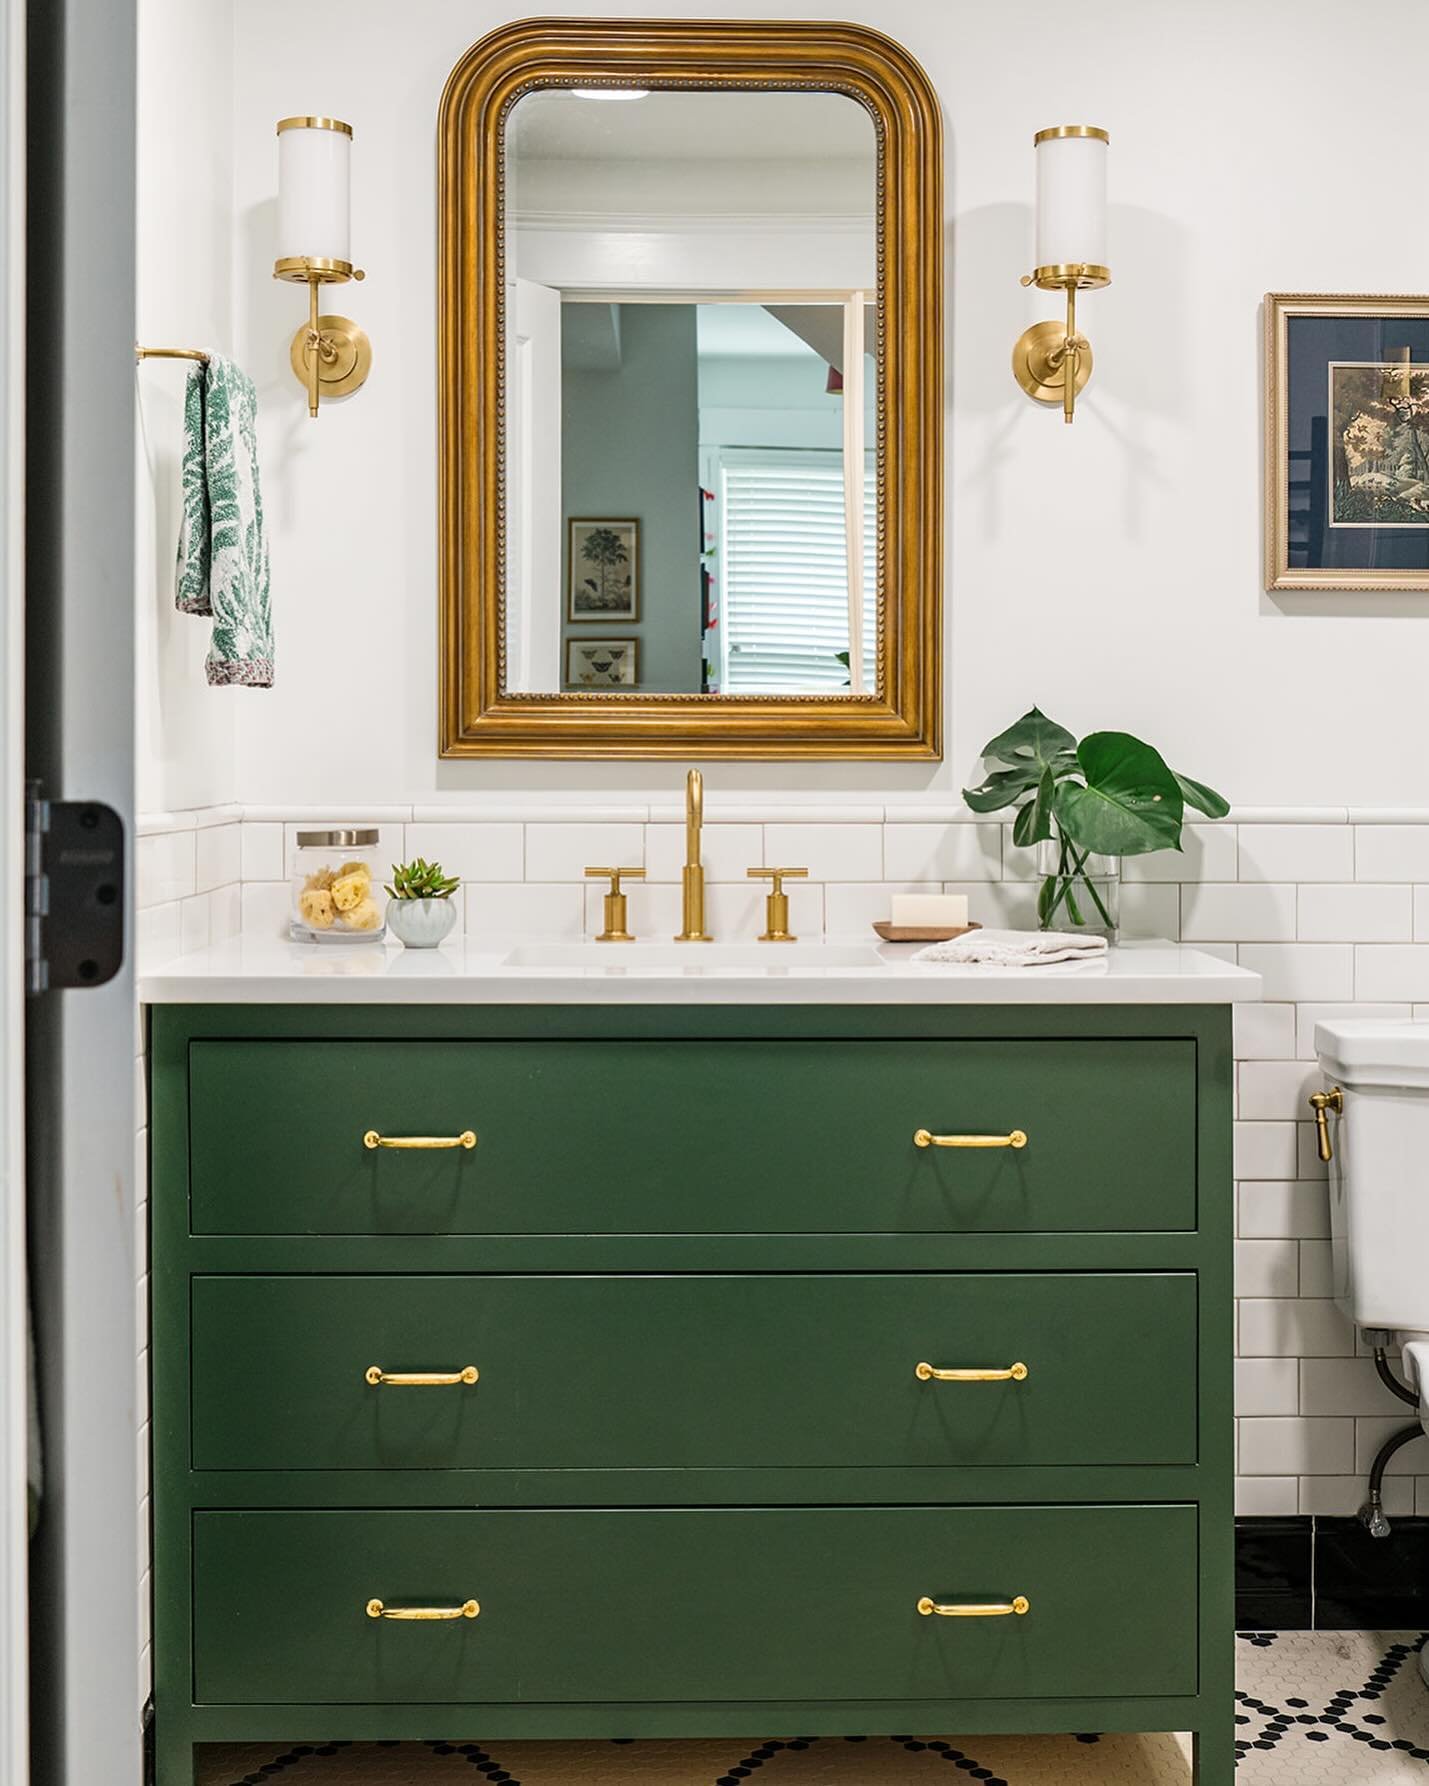 A fun and cheery bathroom for a color loving client. Our approach involves getting to know you, your lifestyle and what brings you joy so we can design the perfect space for the life you want to live. 

Design: Jessica Moran Interiors
Photo: @erinkon